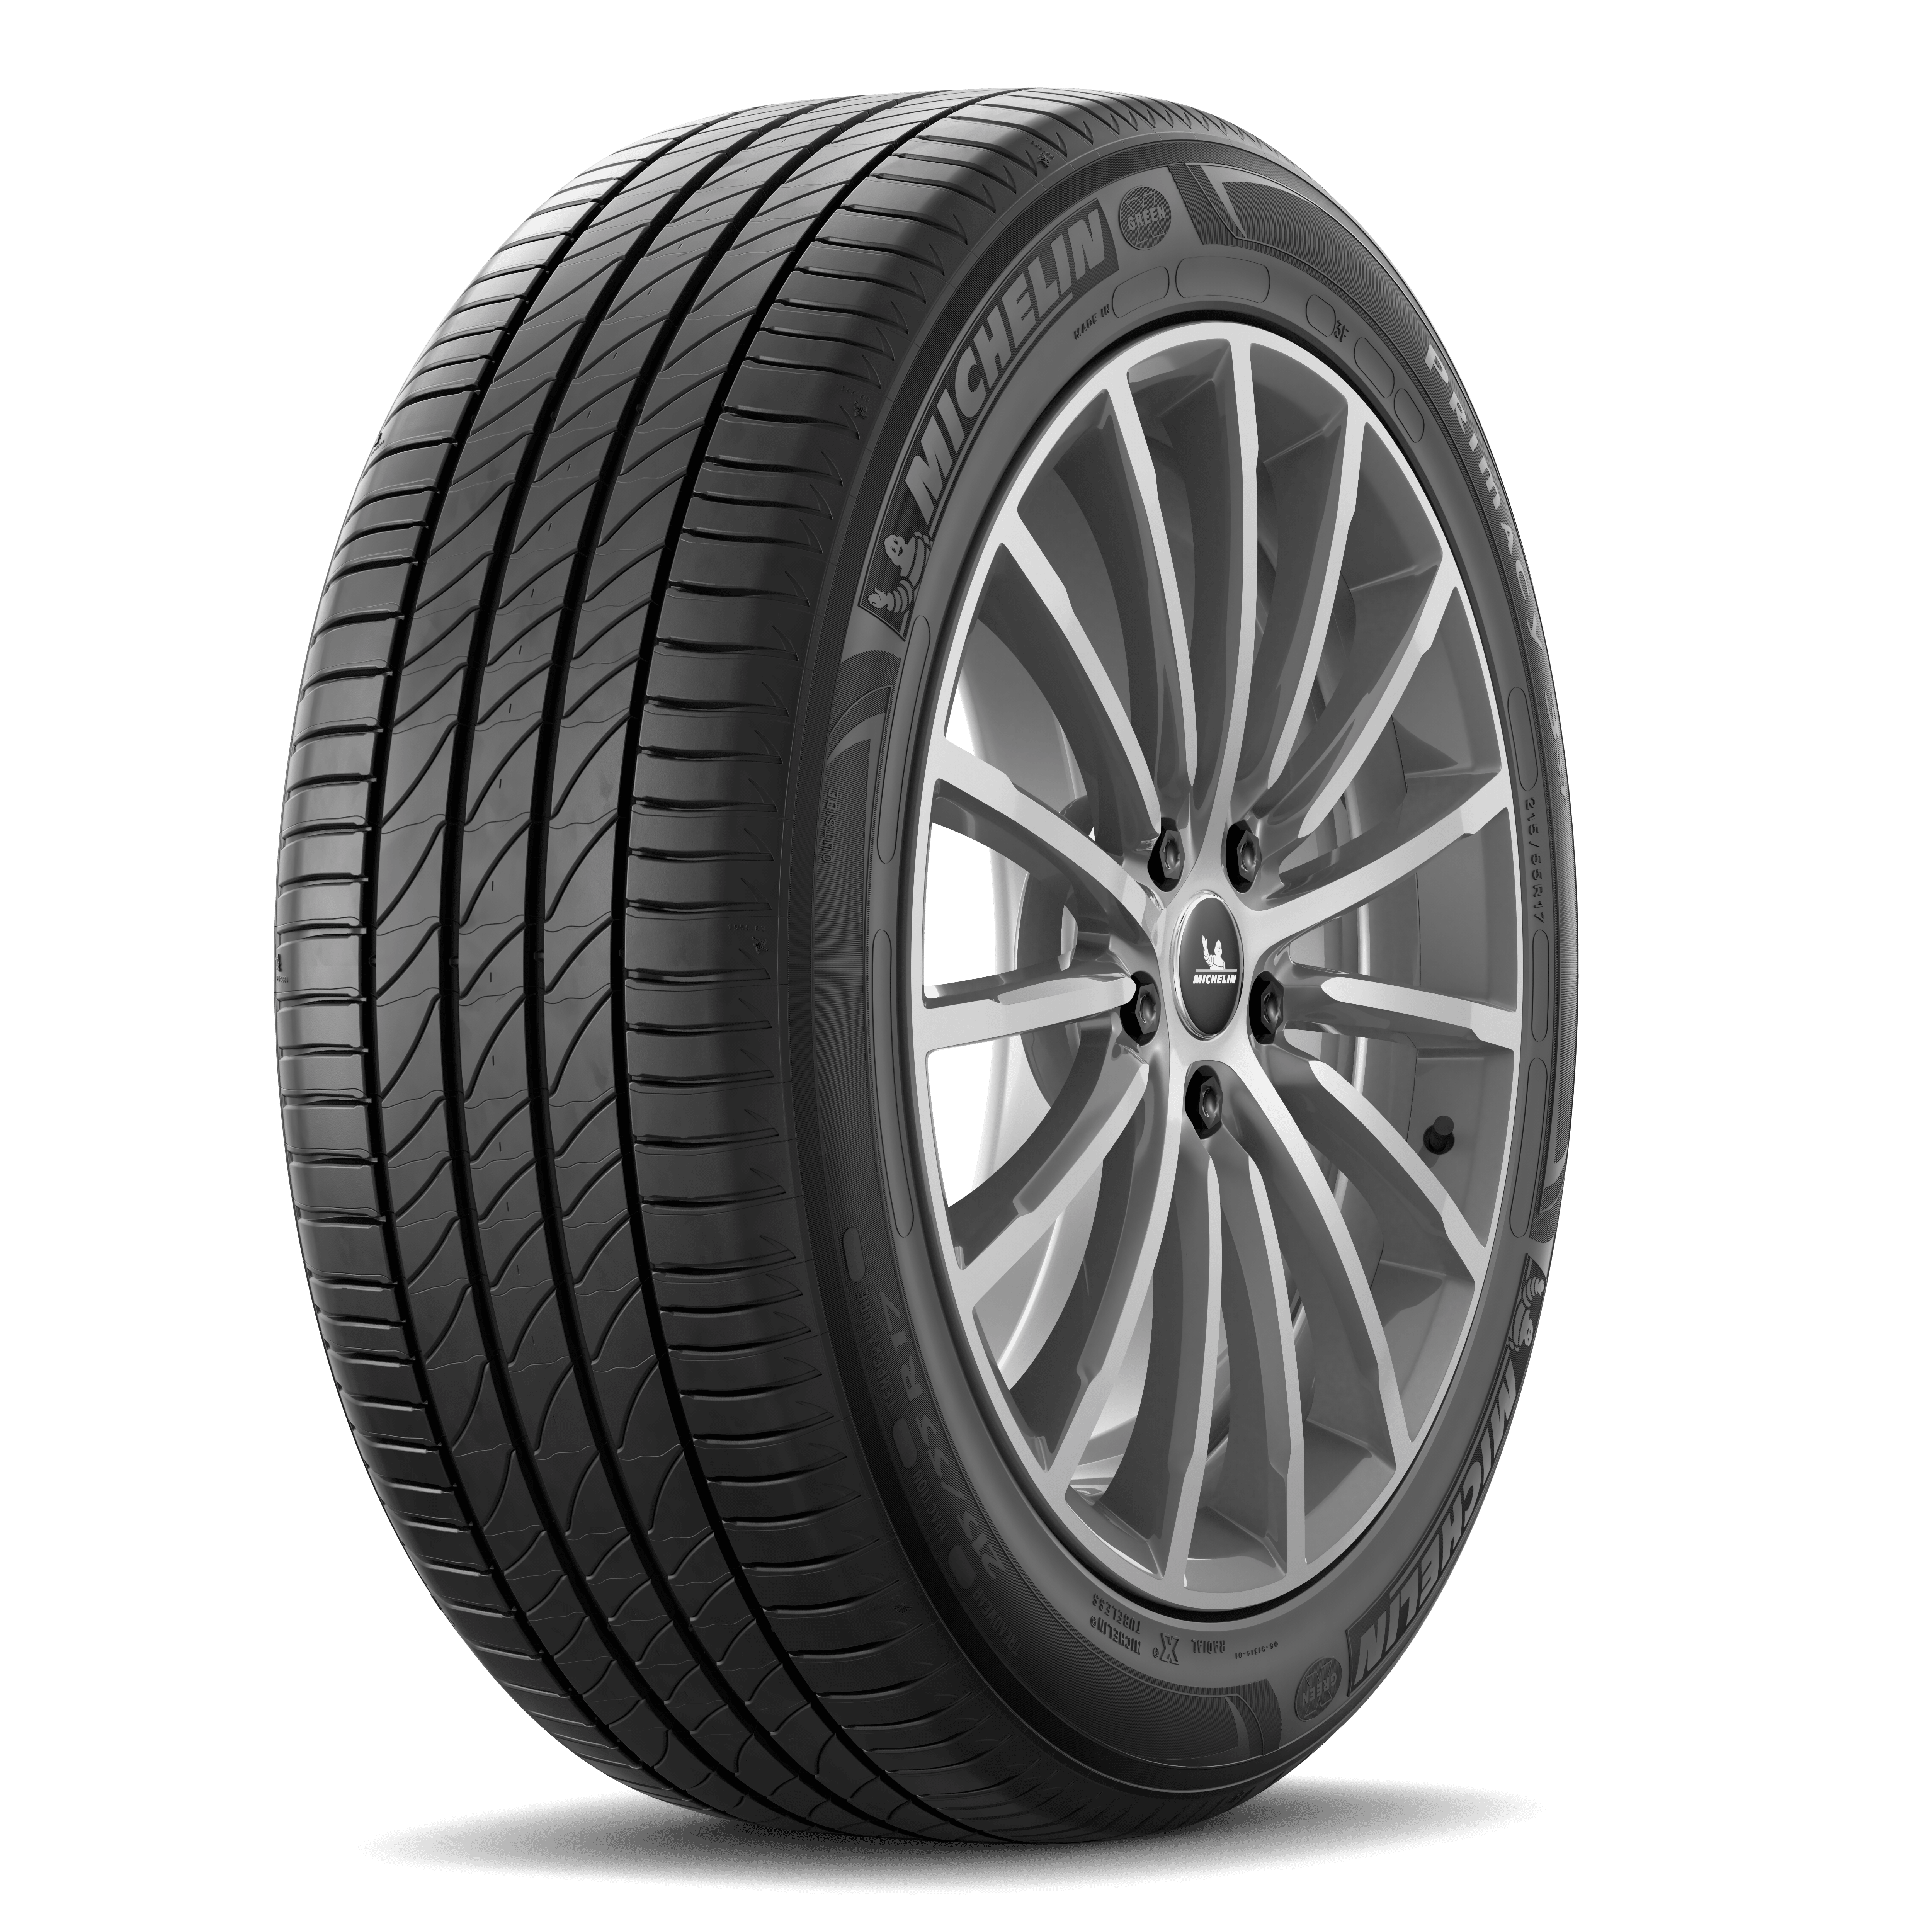 MICHELIN PRIMACY 3 ST - Car Tyre | MICHELIN ประเทศไทย Official Website